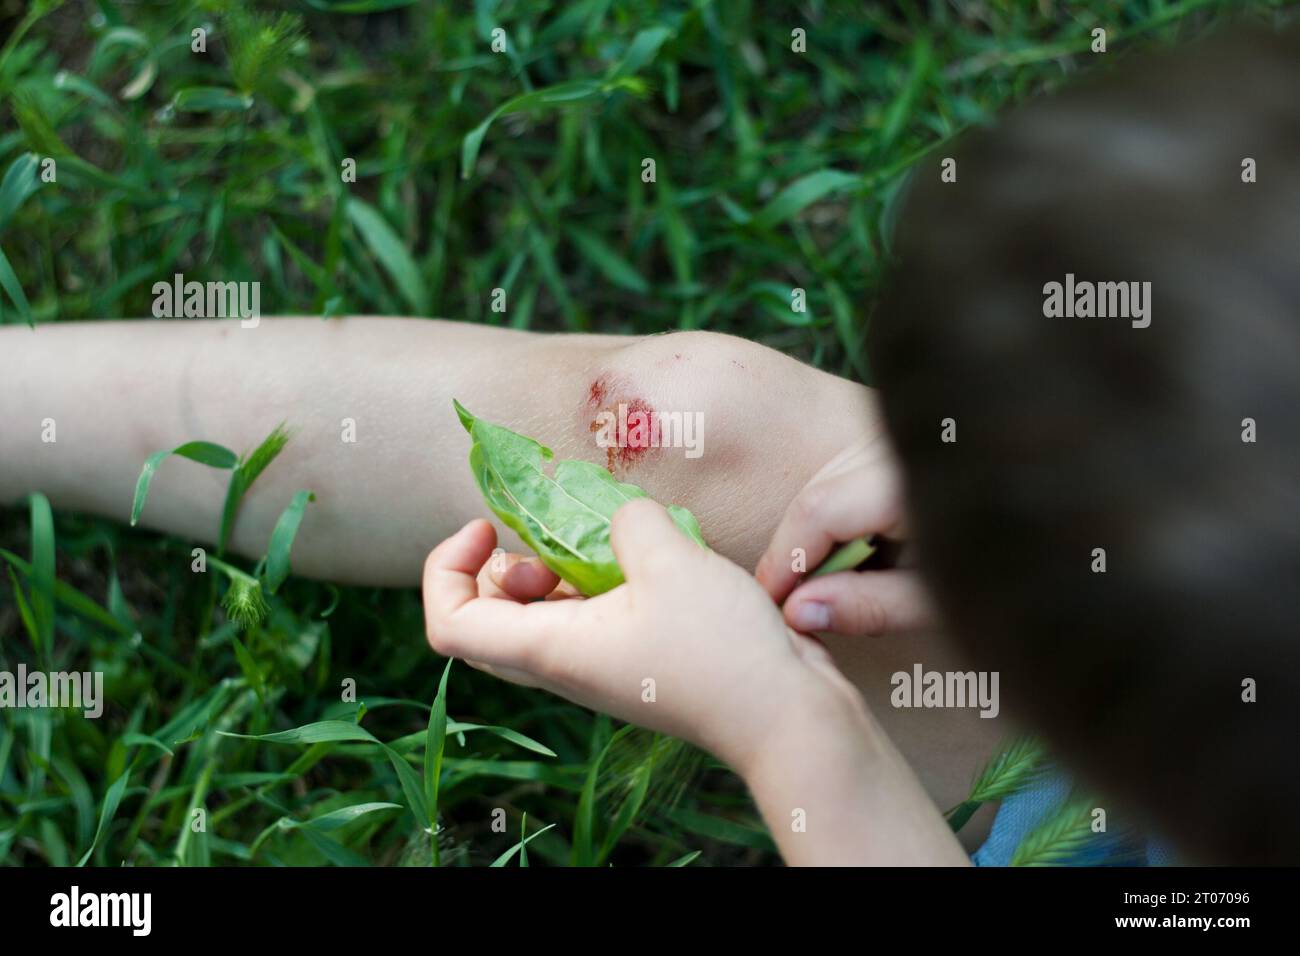 Closeup of fresh bleeding wound on child knee due to fall. child applies plantain leaf to wound. Children injuries in summer outdoors. Phytotherapy, f Stock Photo